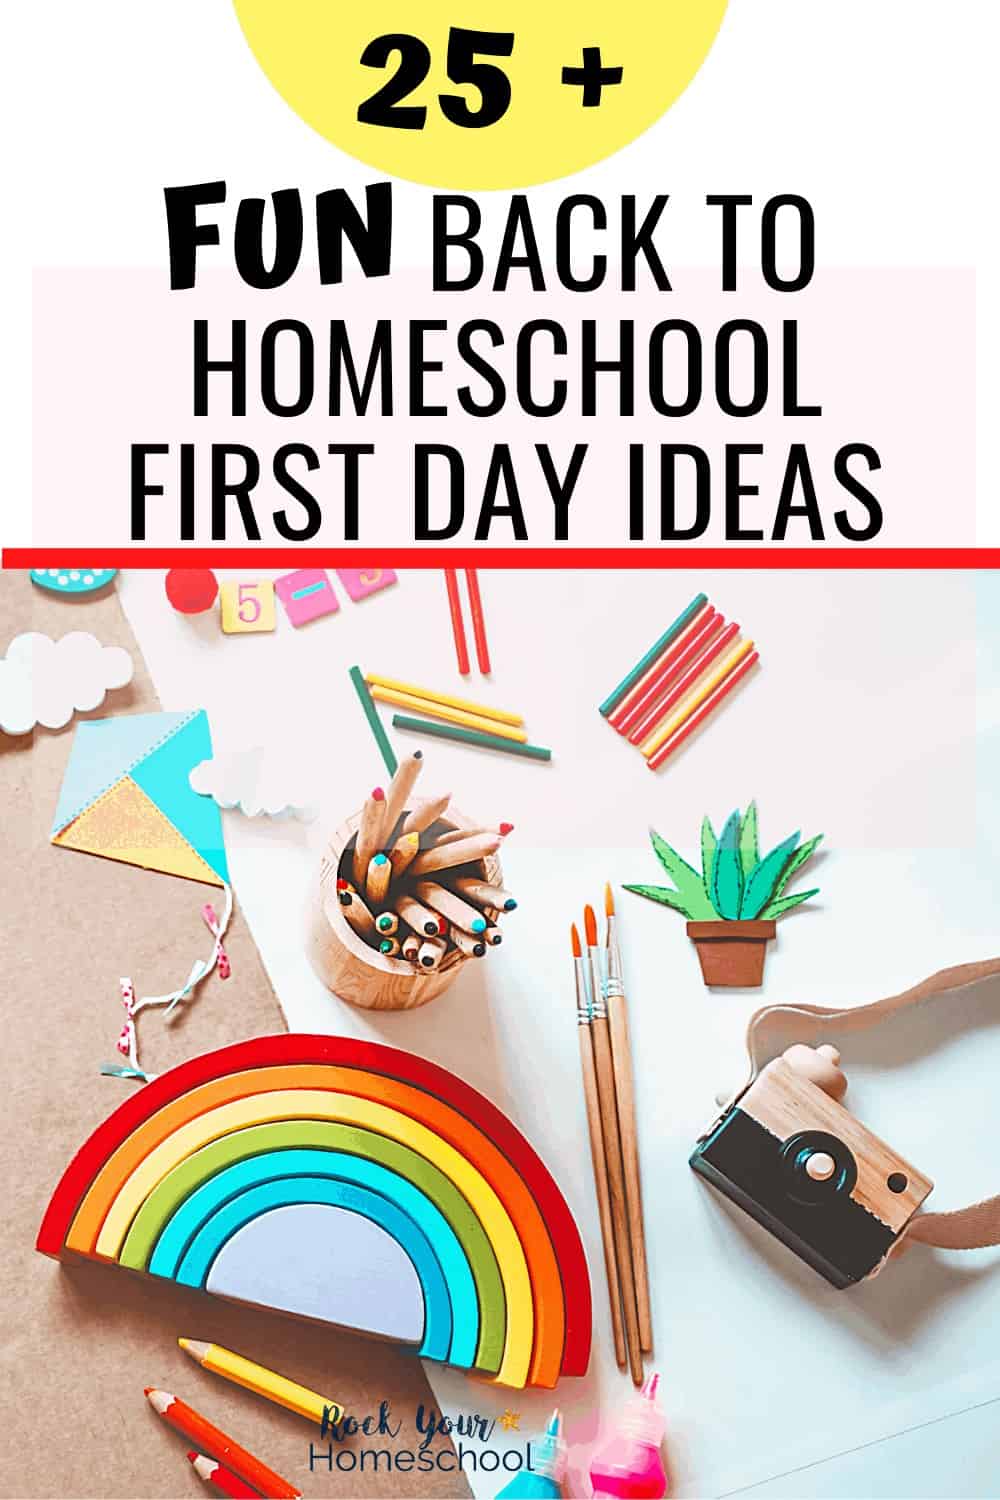 Variety of fun homeschool supplies including color pencils and rainbow wooden puzzle to feature how you can have amazing back to homeschool fun with these 25+ ideas